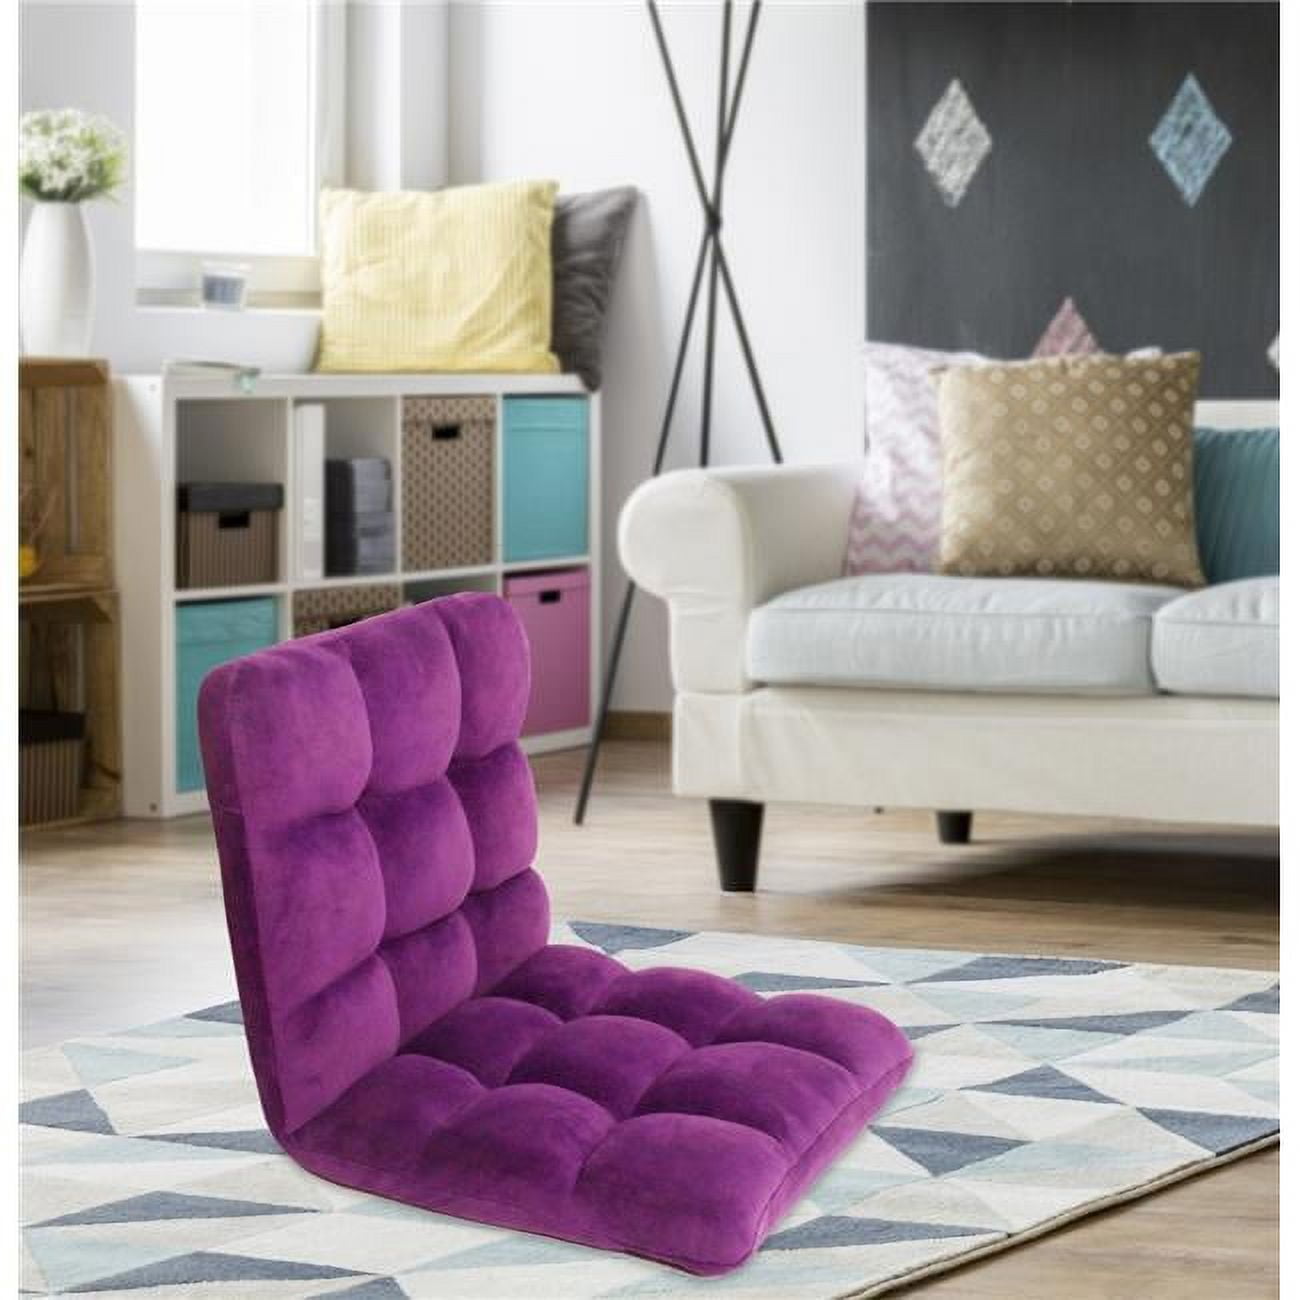 Urban Microfiber Modern Contemporary Armless Quilted Purple Recliner Chair